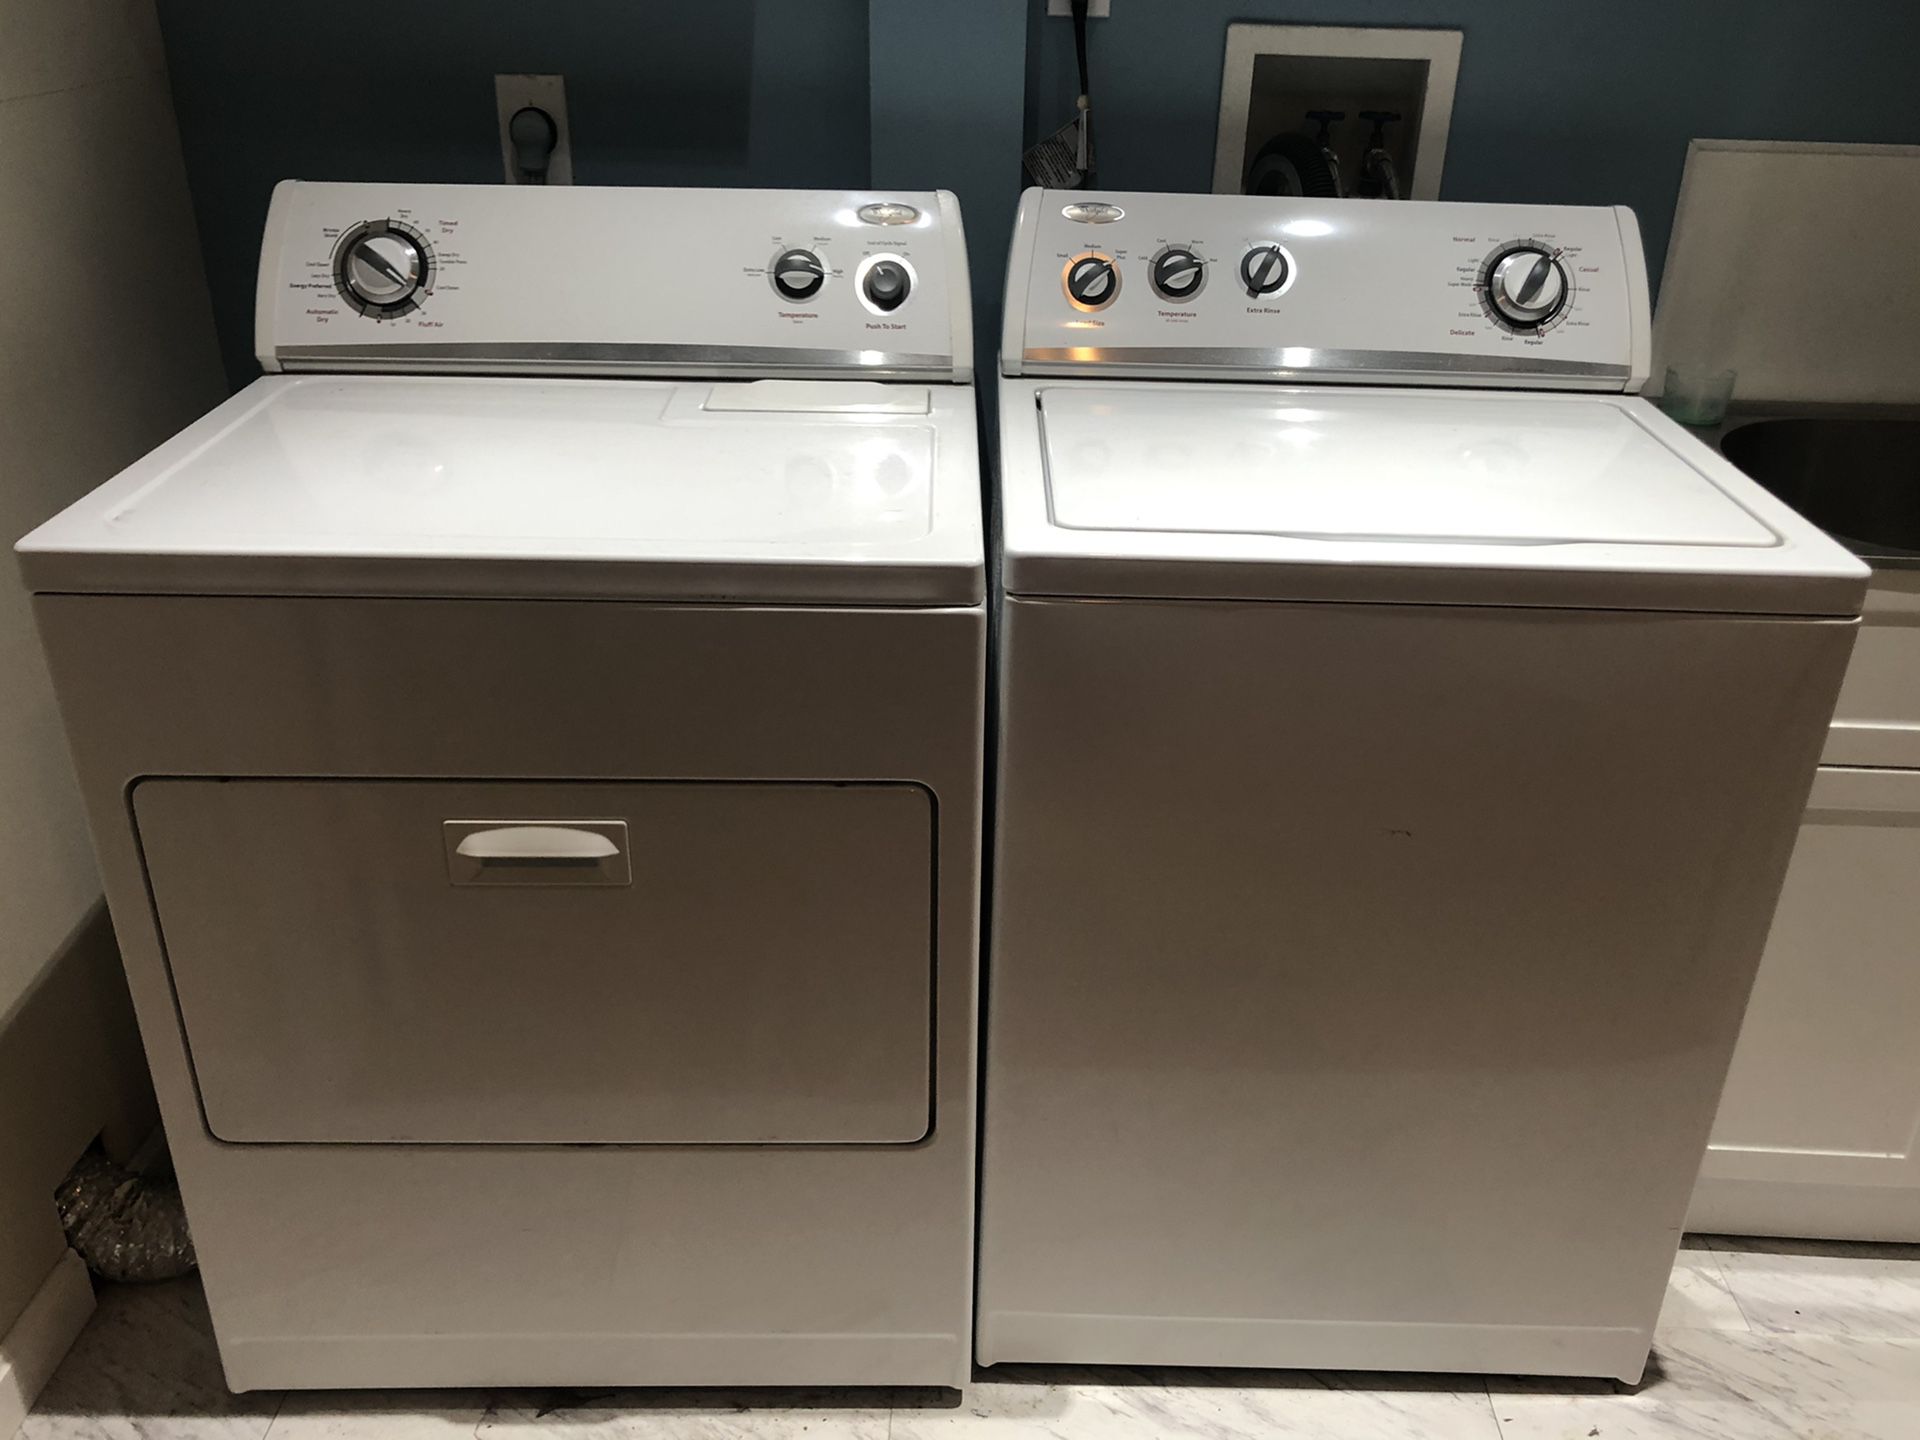 Washer and Dryer - Whirlpool